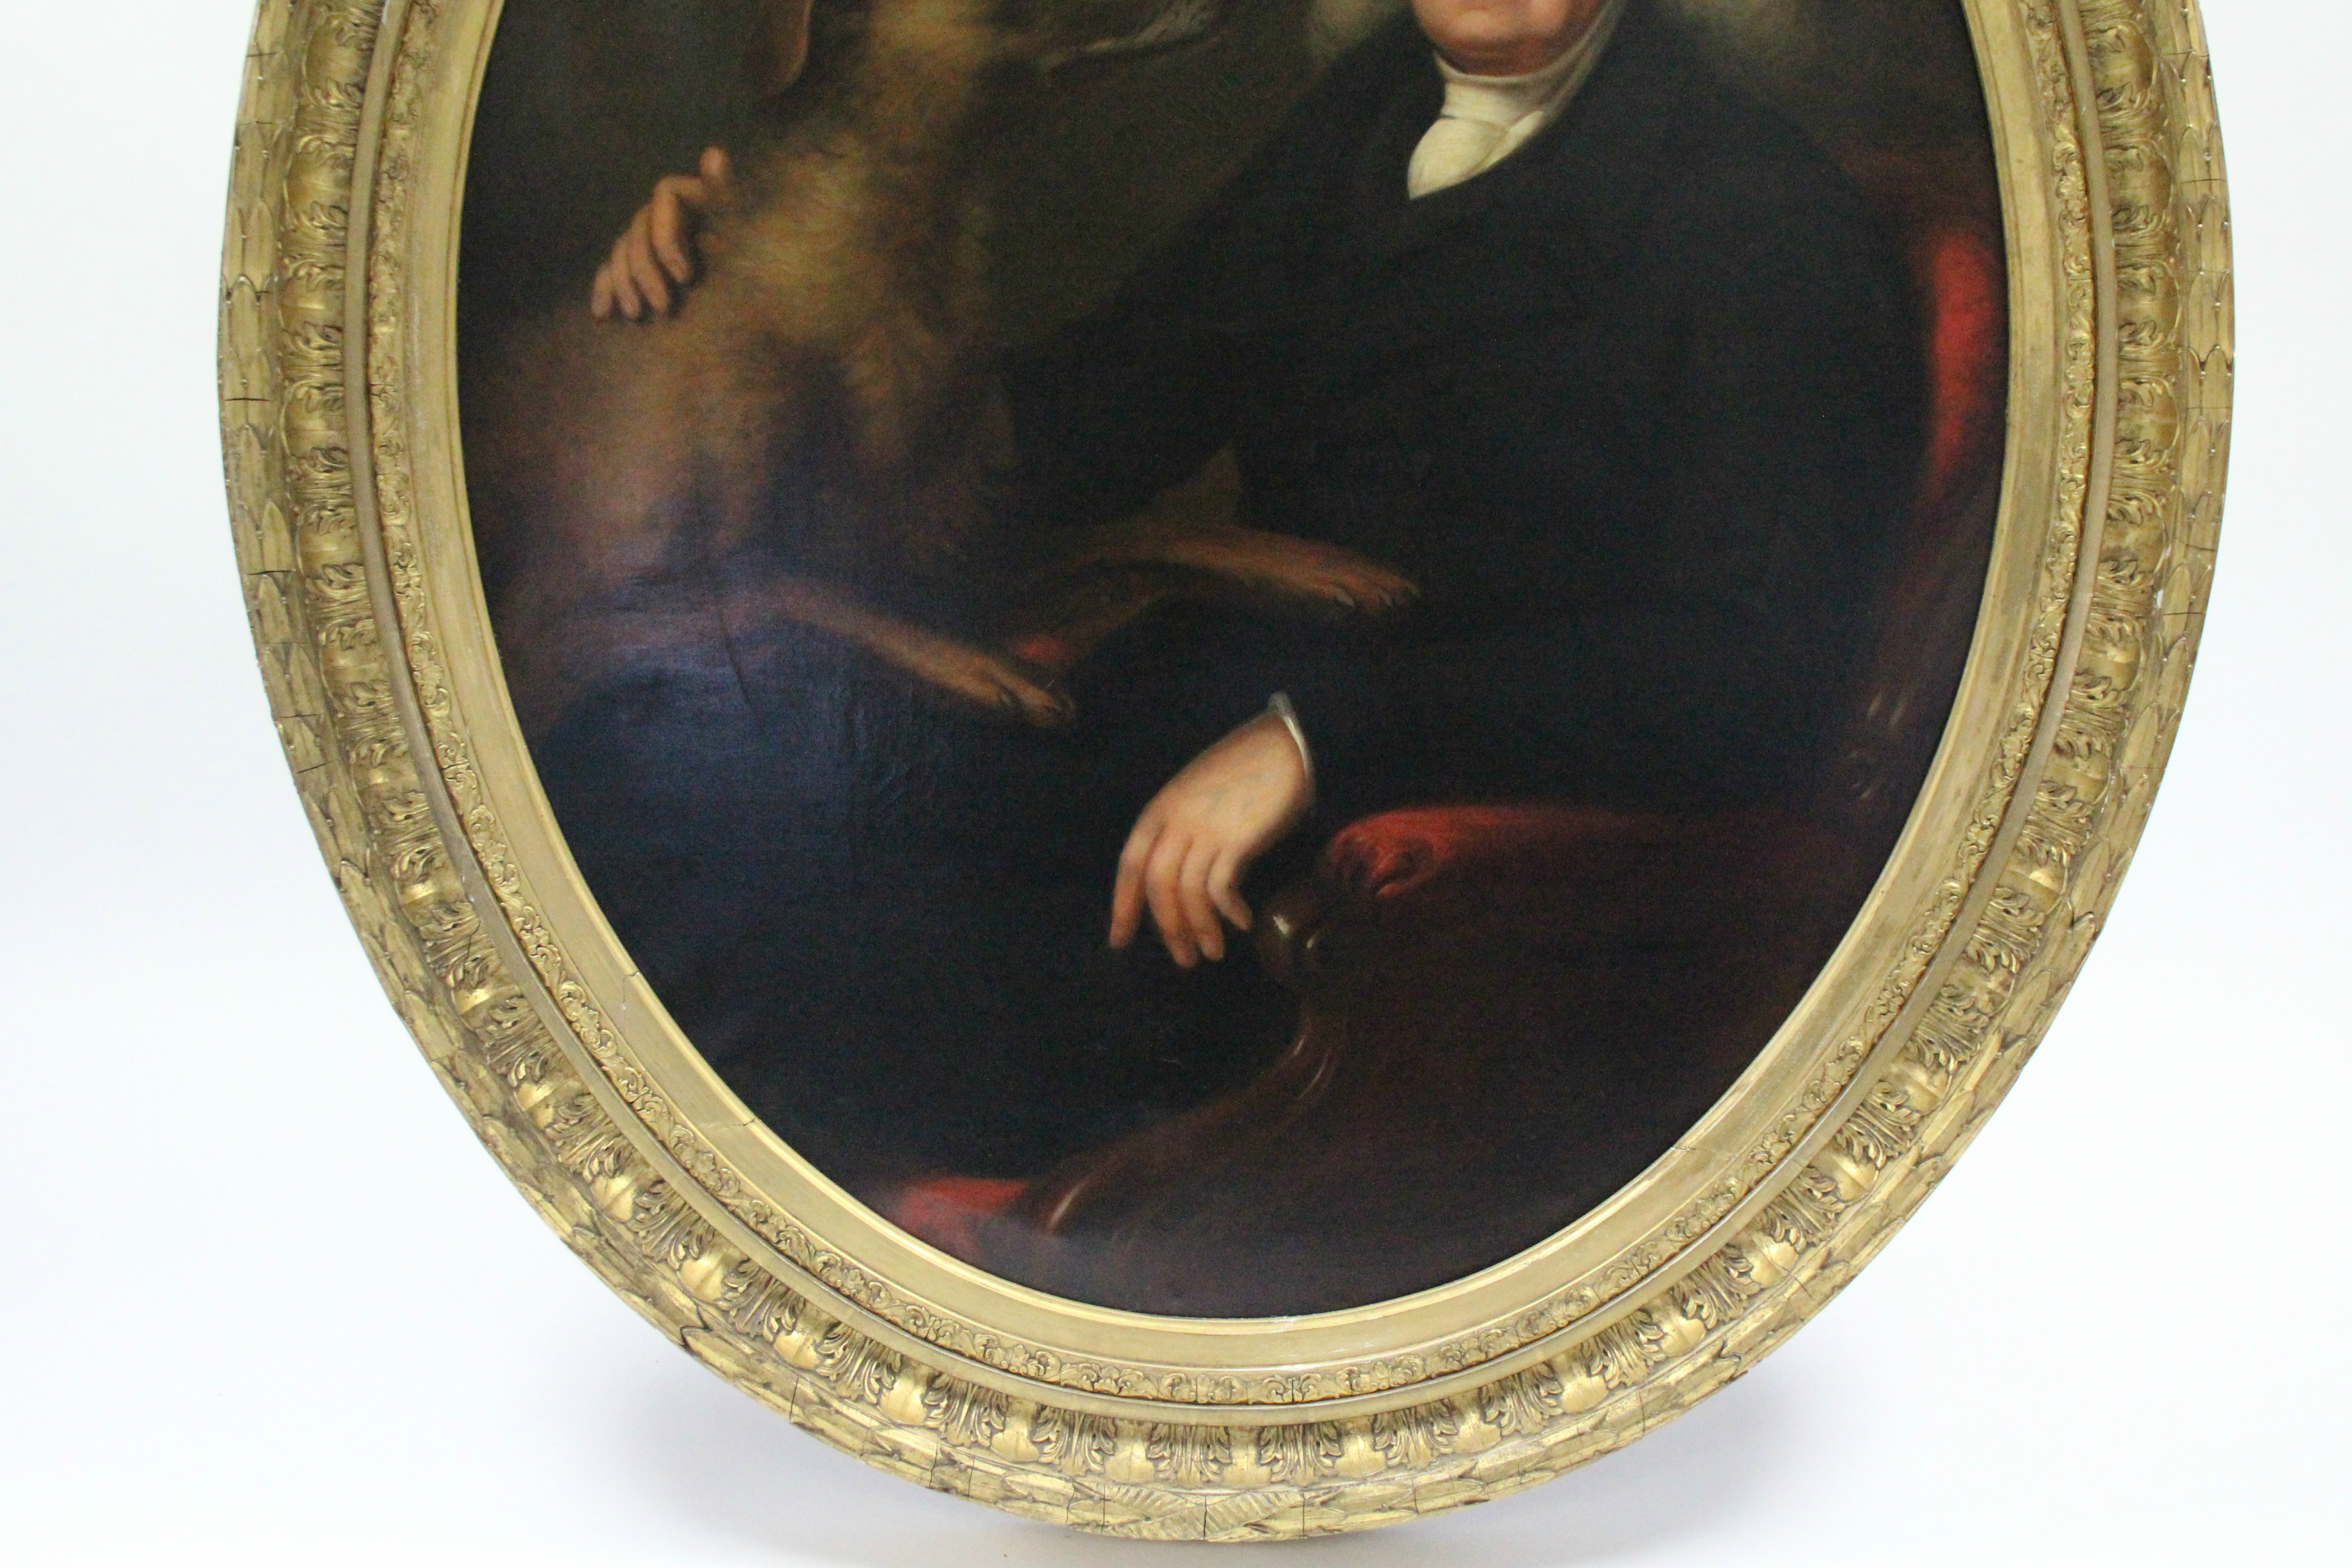 ENGLISH SCHOOL, mid-19th century. A half-length portrait of an elderly gentleman seated in an - Image 4 of 7